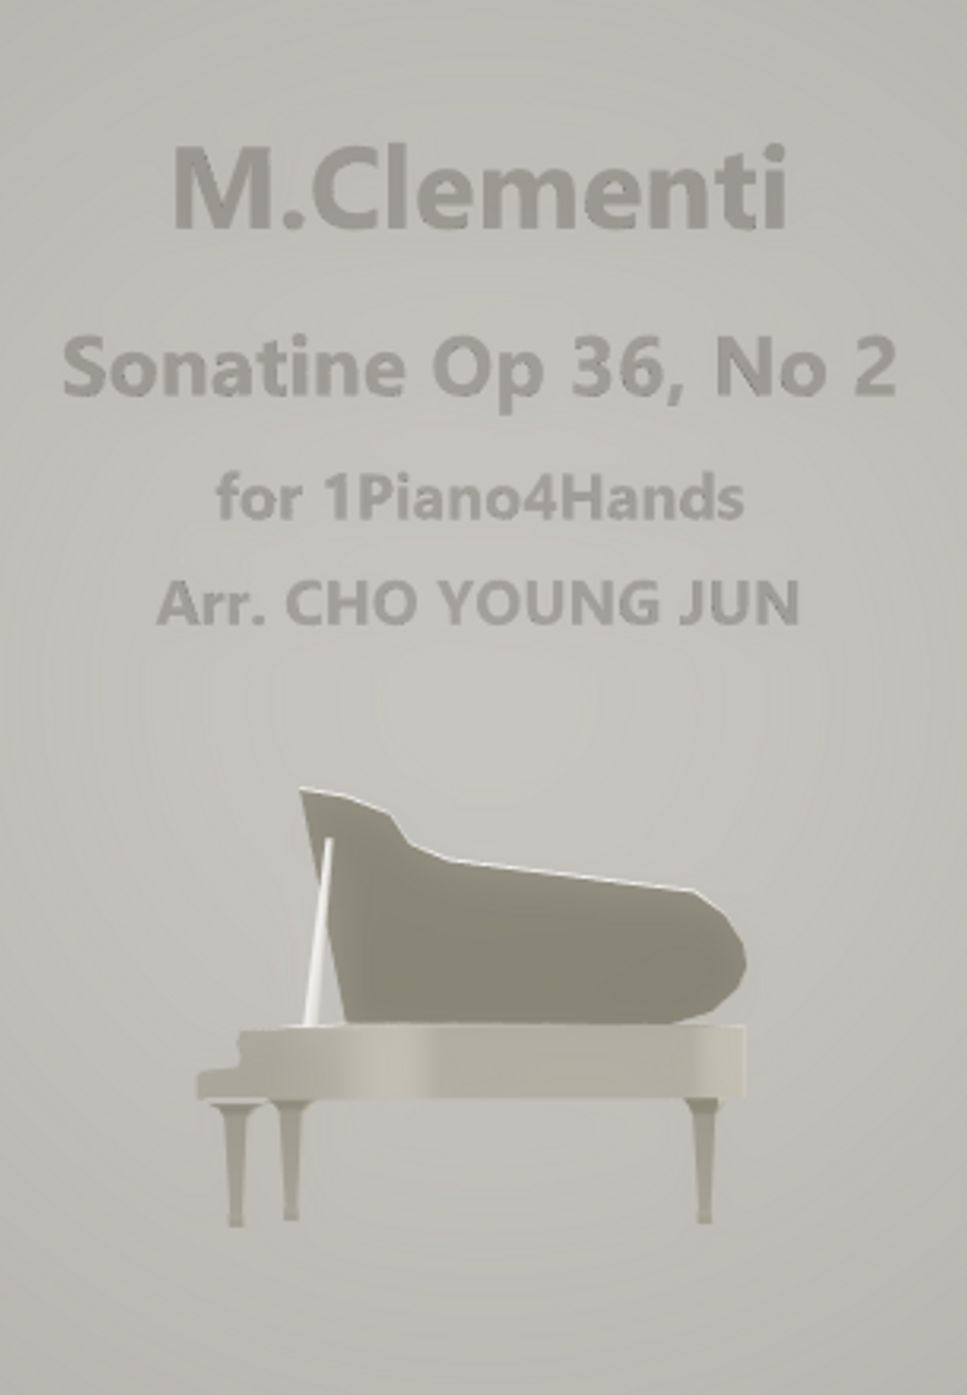 M.Clementi - Sonatine Op 36, No 2 for 1Piano4Hands (1Piano4Hands) by Choyoungjun